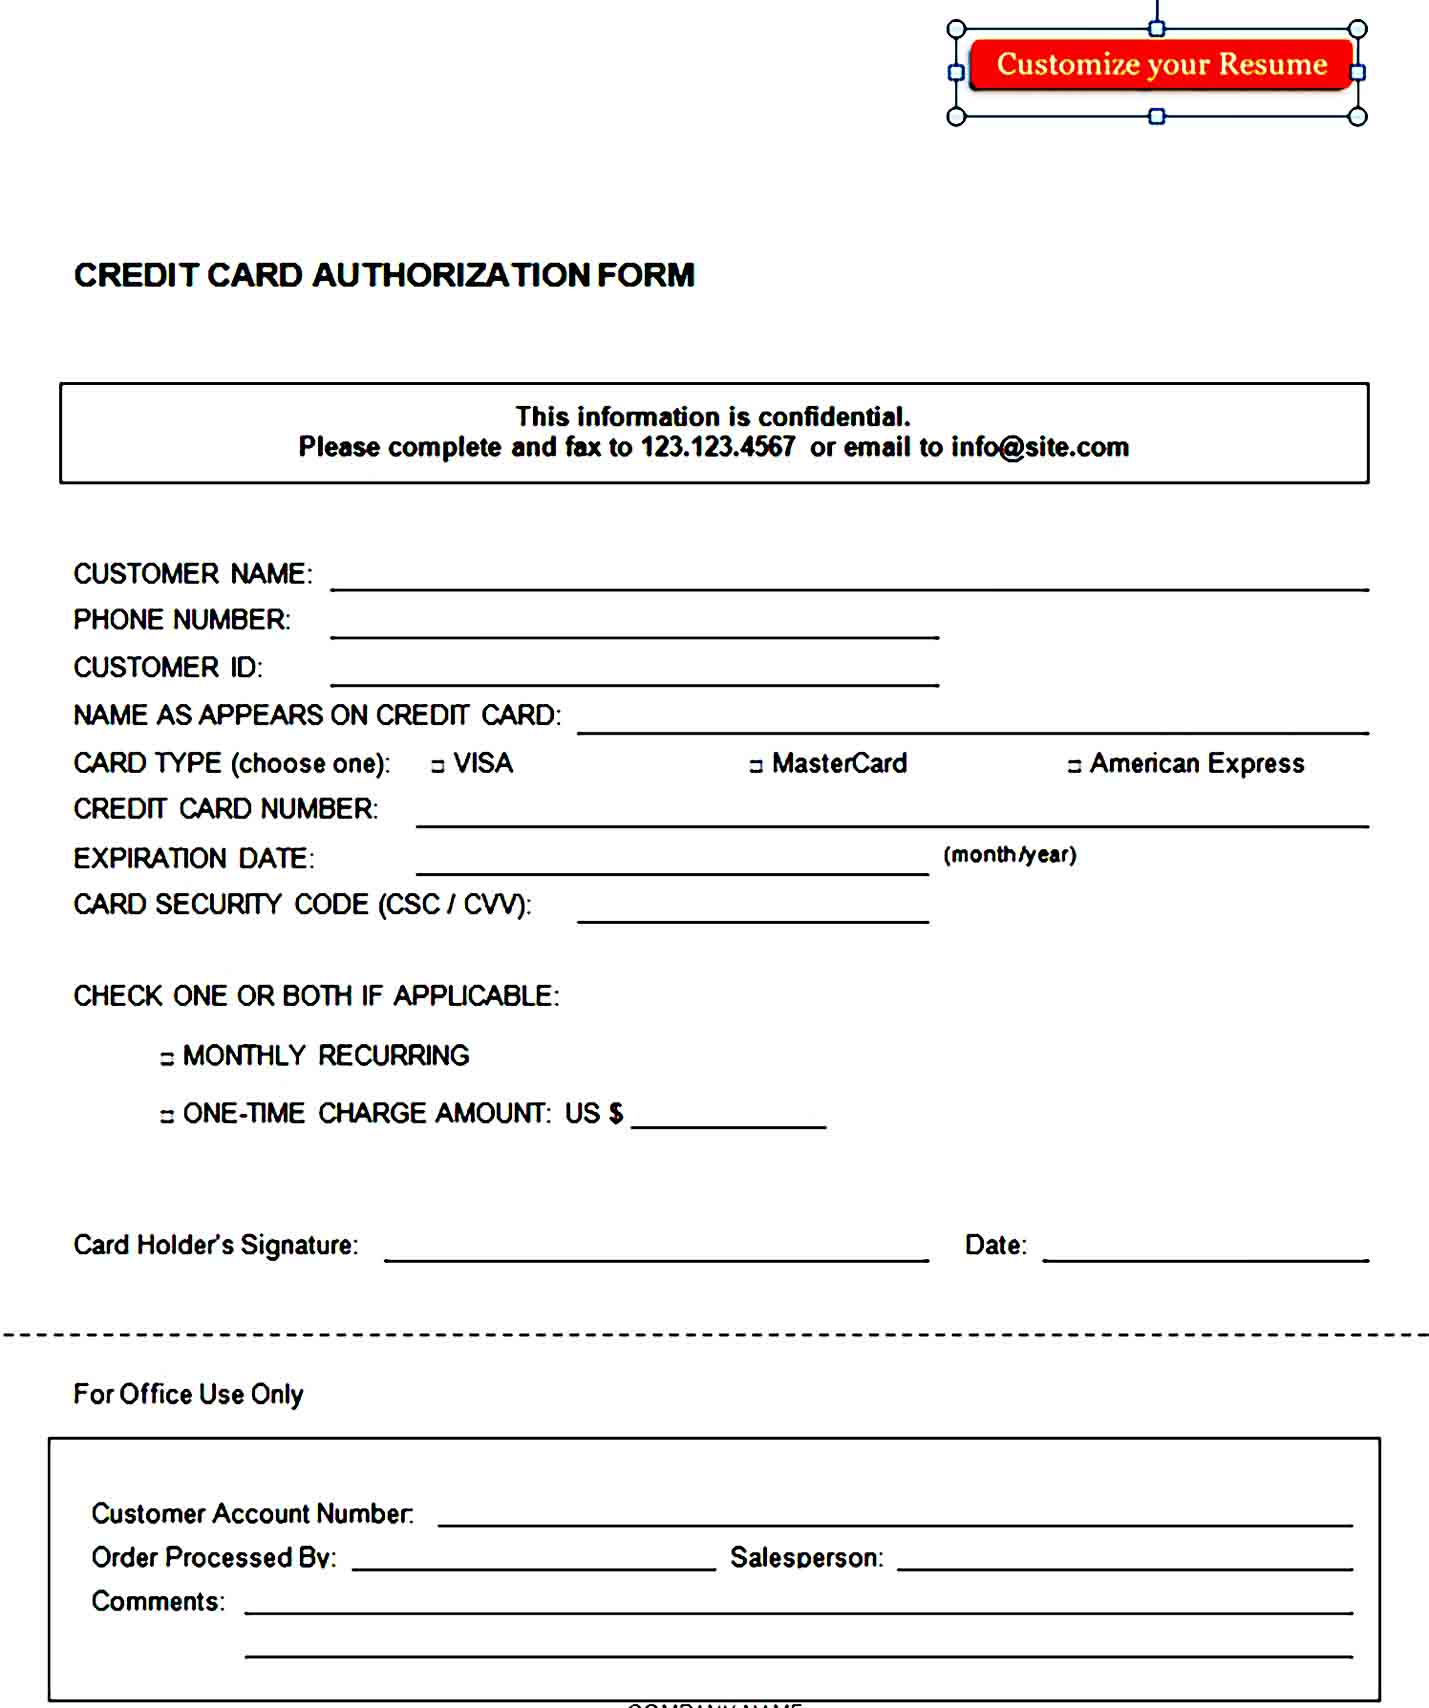 credit card authorization form template 07